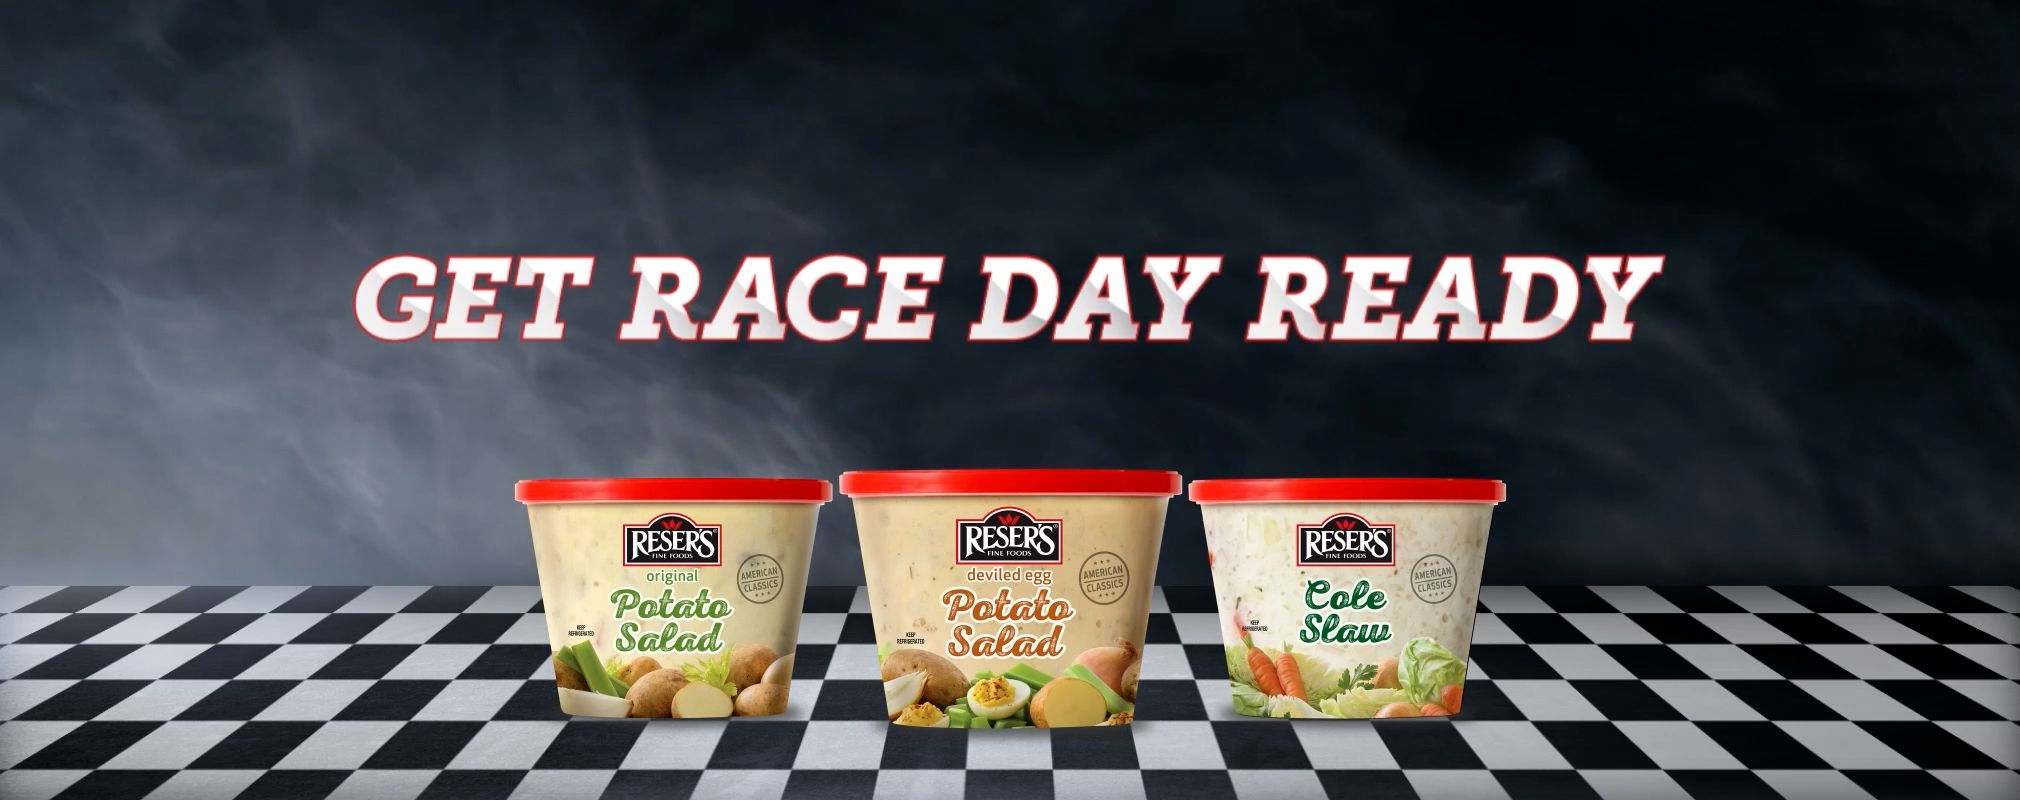 get race day ready with resers